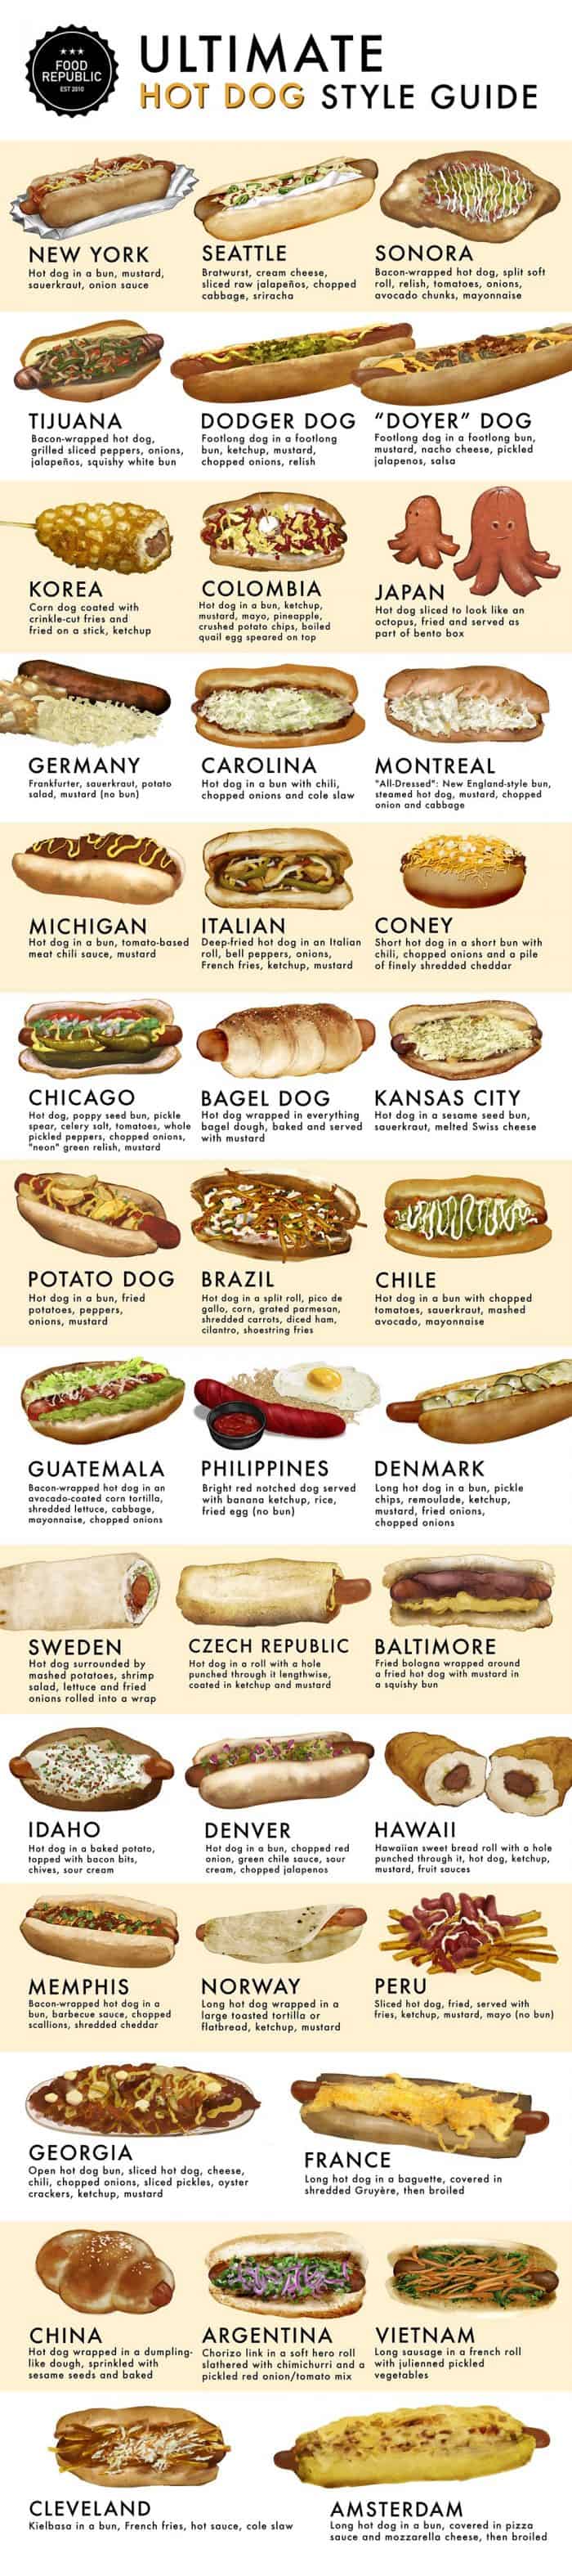 Hot Dog Guide